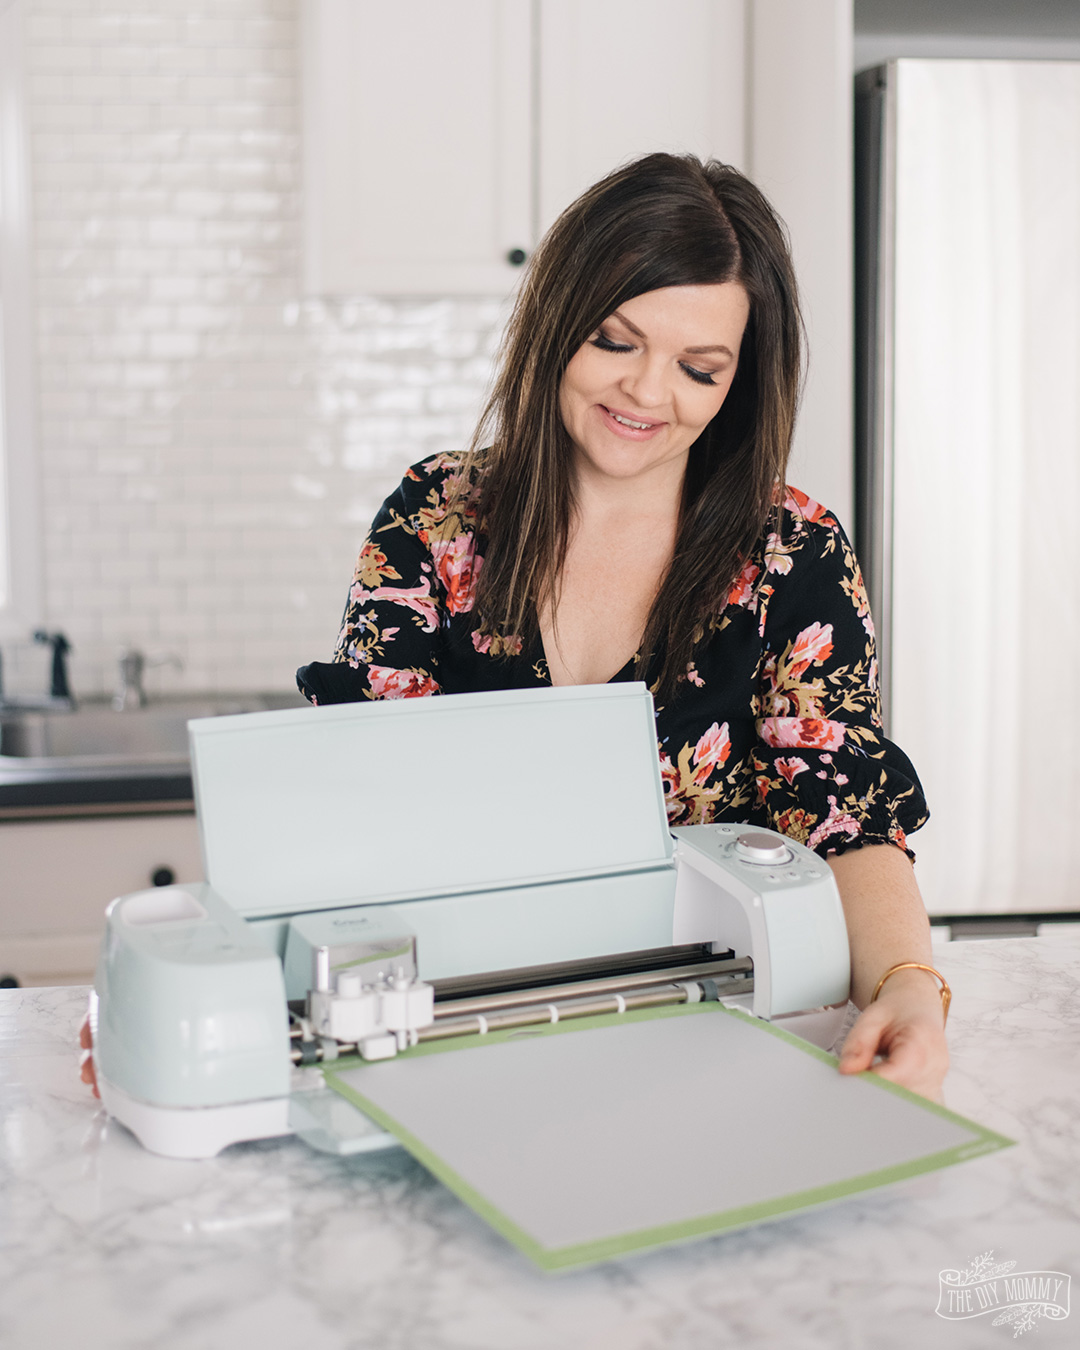 How to setup a Cricut for the first time